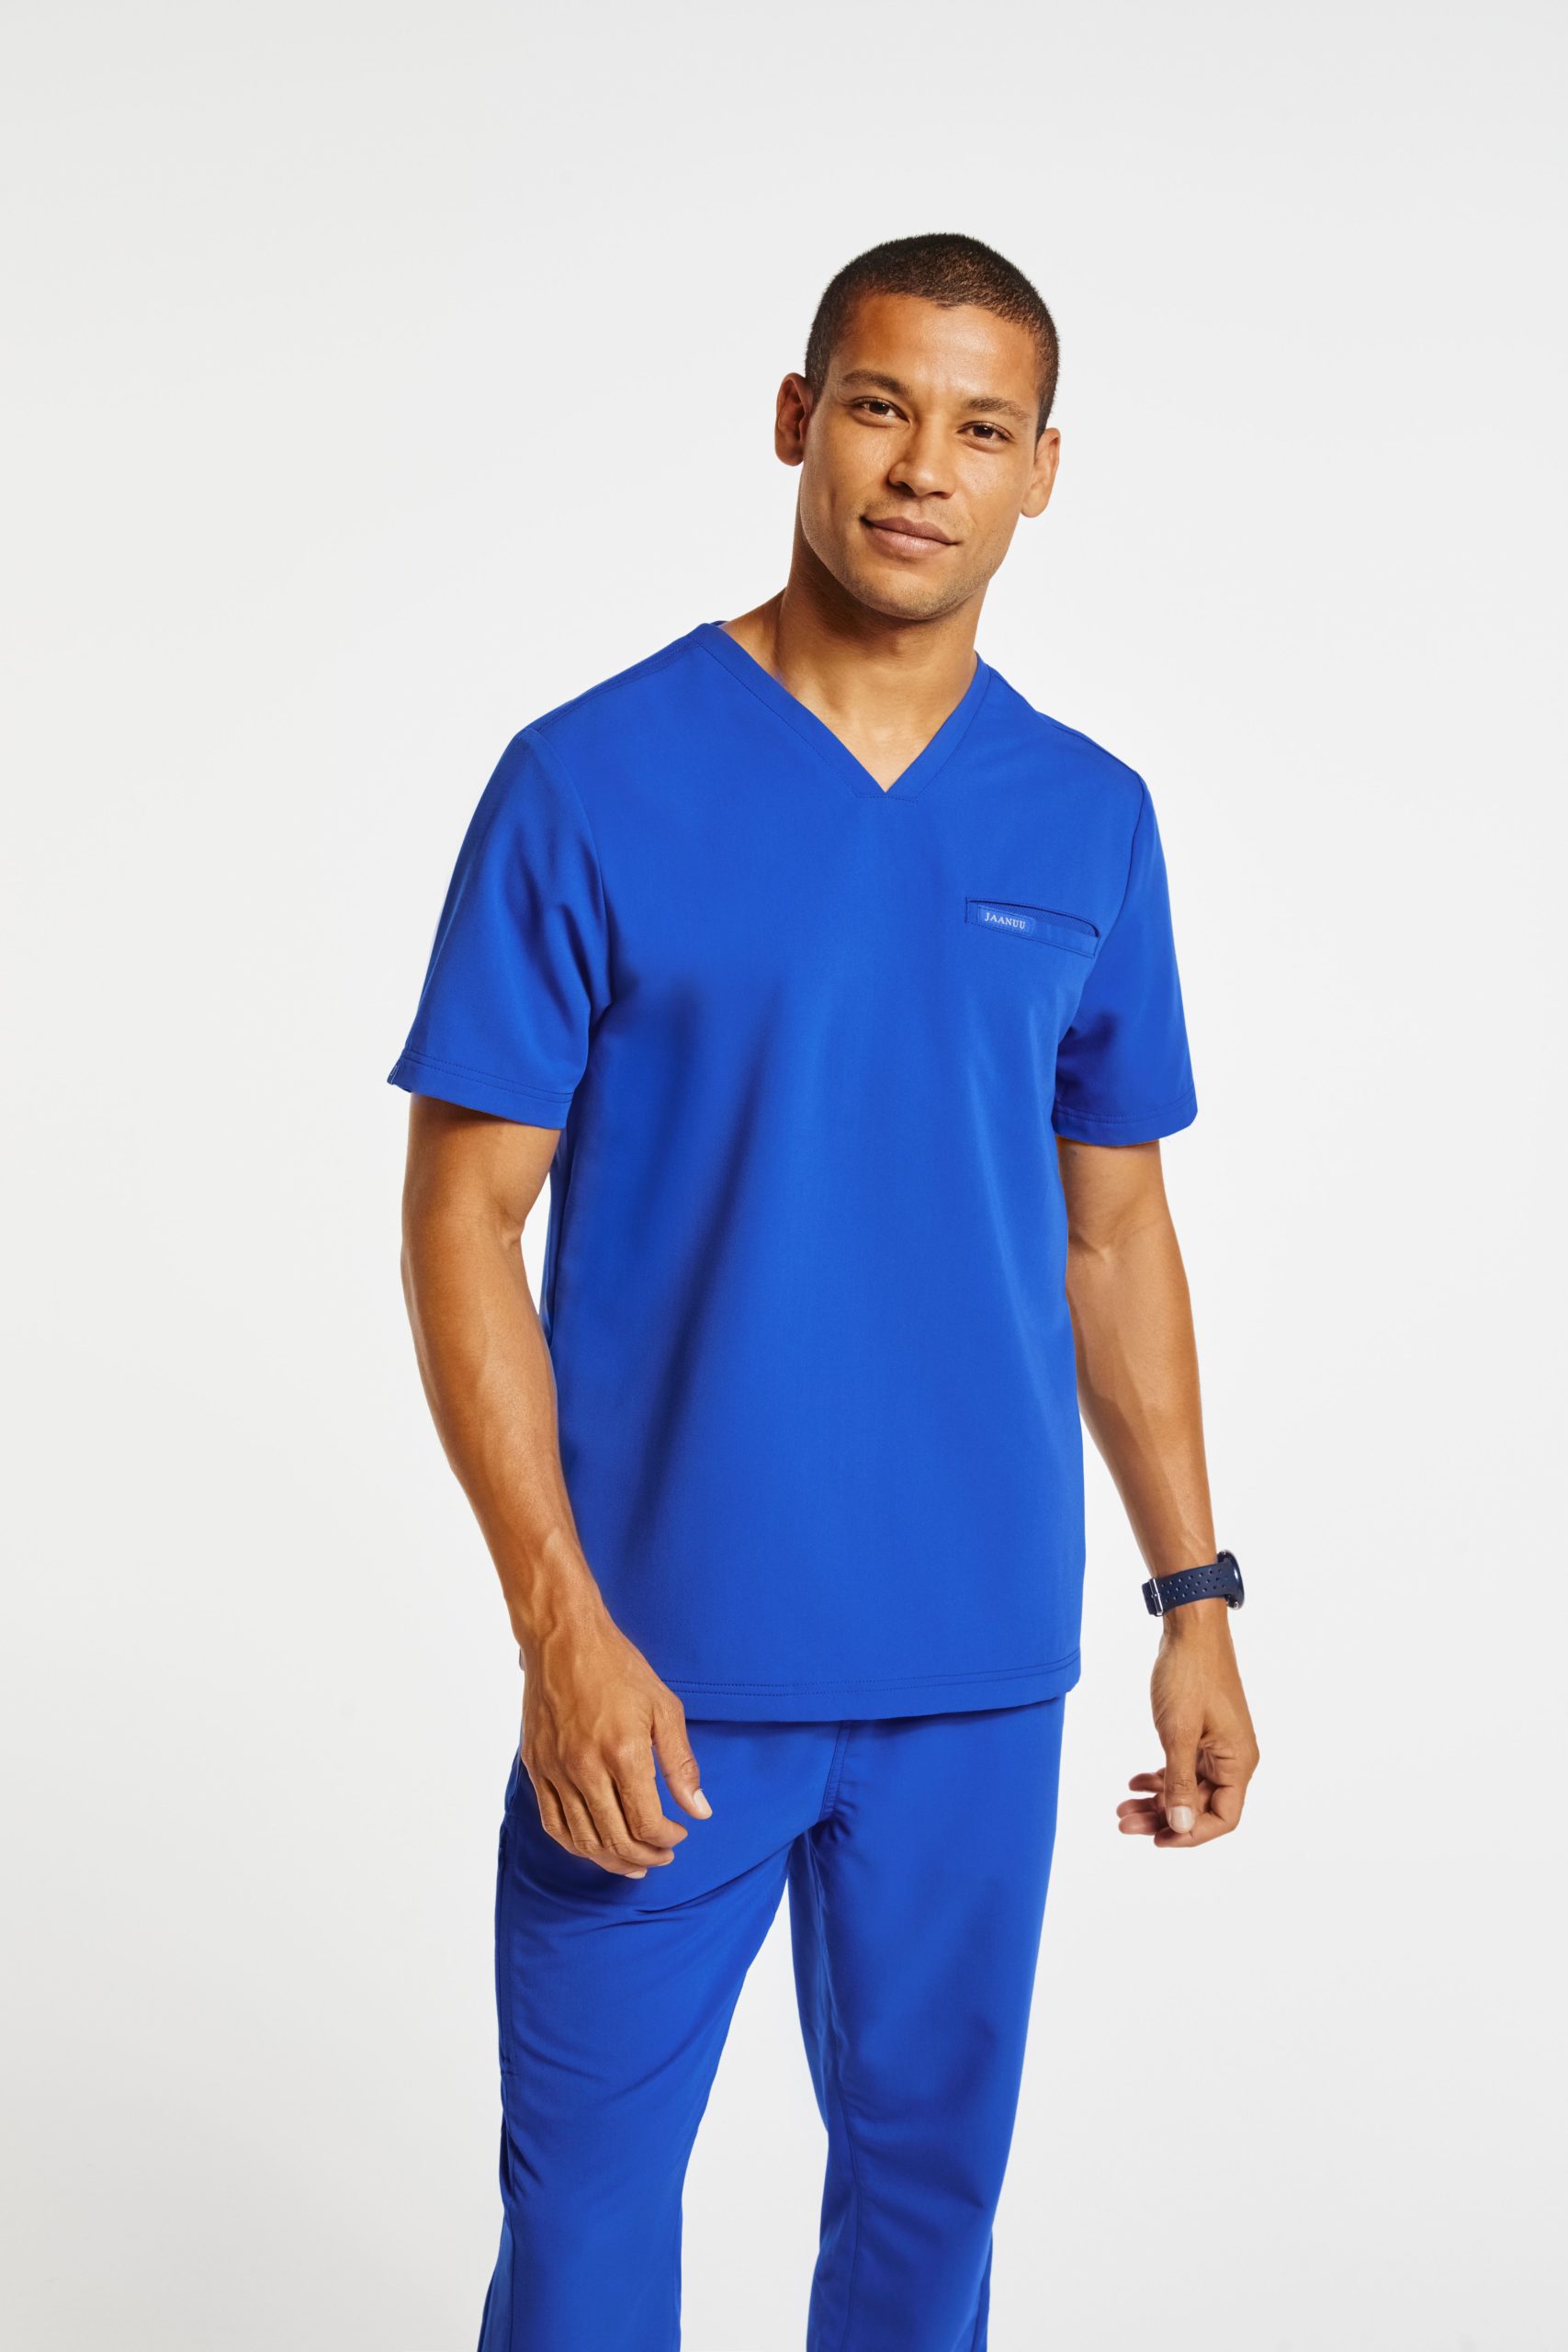 Our 8 Most Comfortable Scrubs To Make Your Shifts Less Tense | Jaanuu